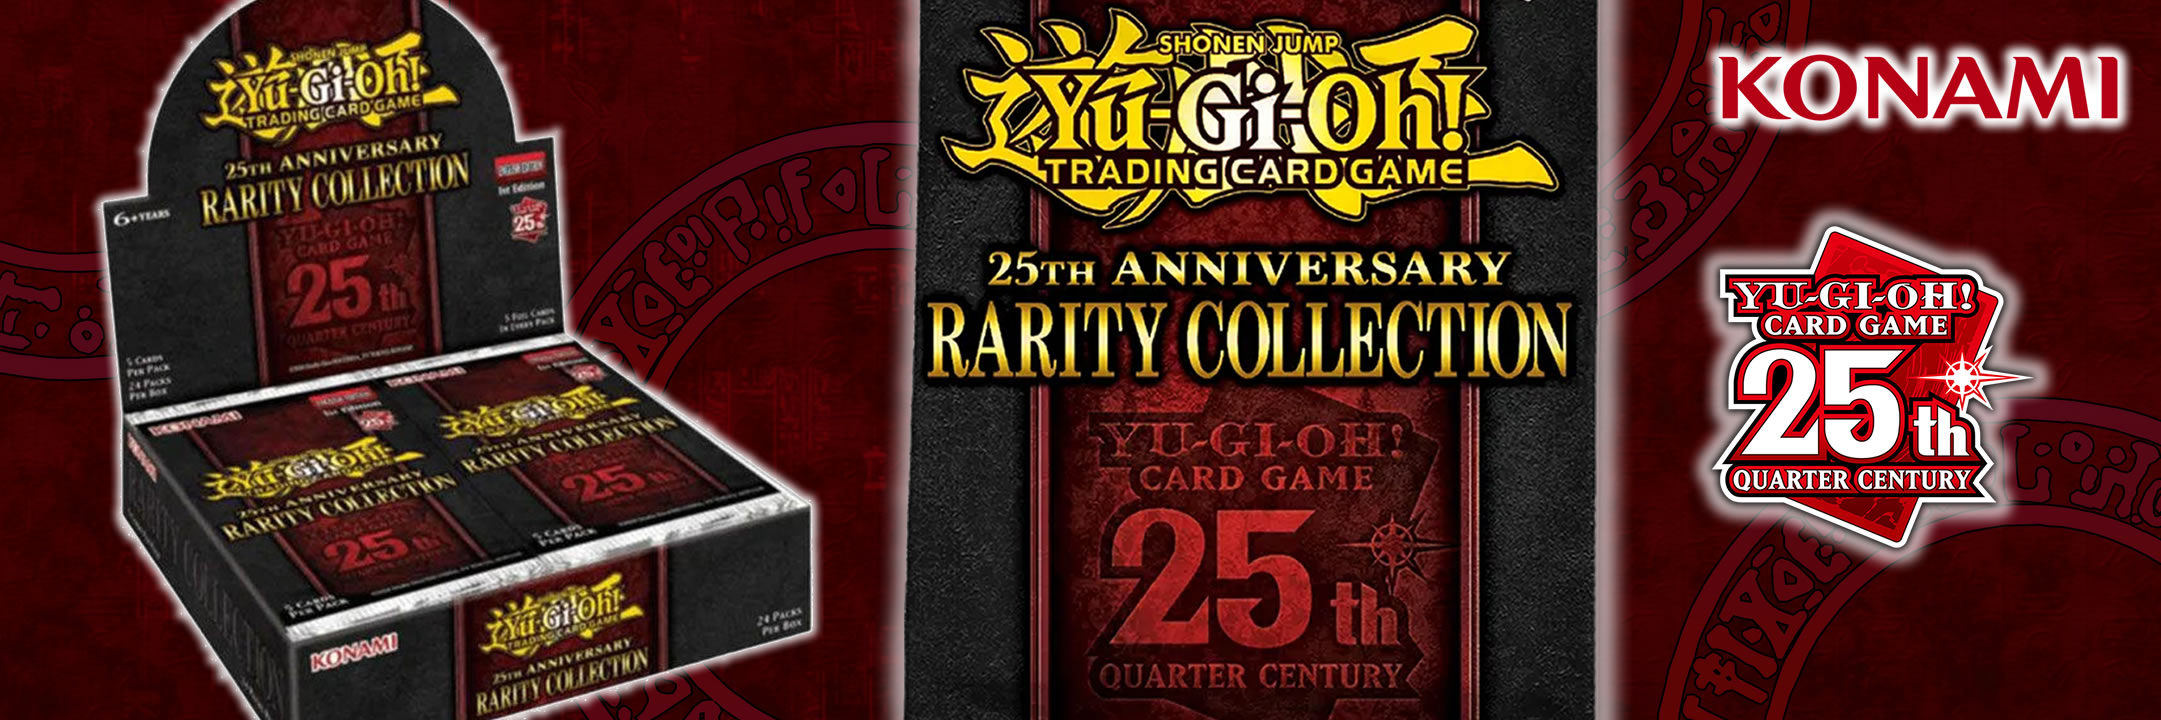 Yu-Gi-Oh! Trading Card Game - 25th Anniversary Rarity Collection